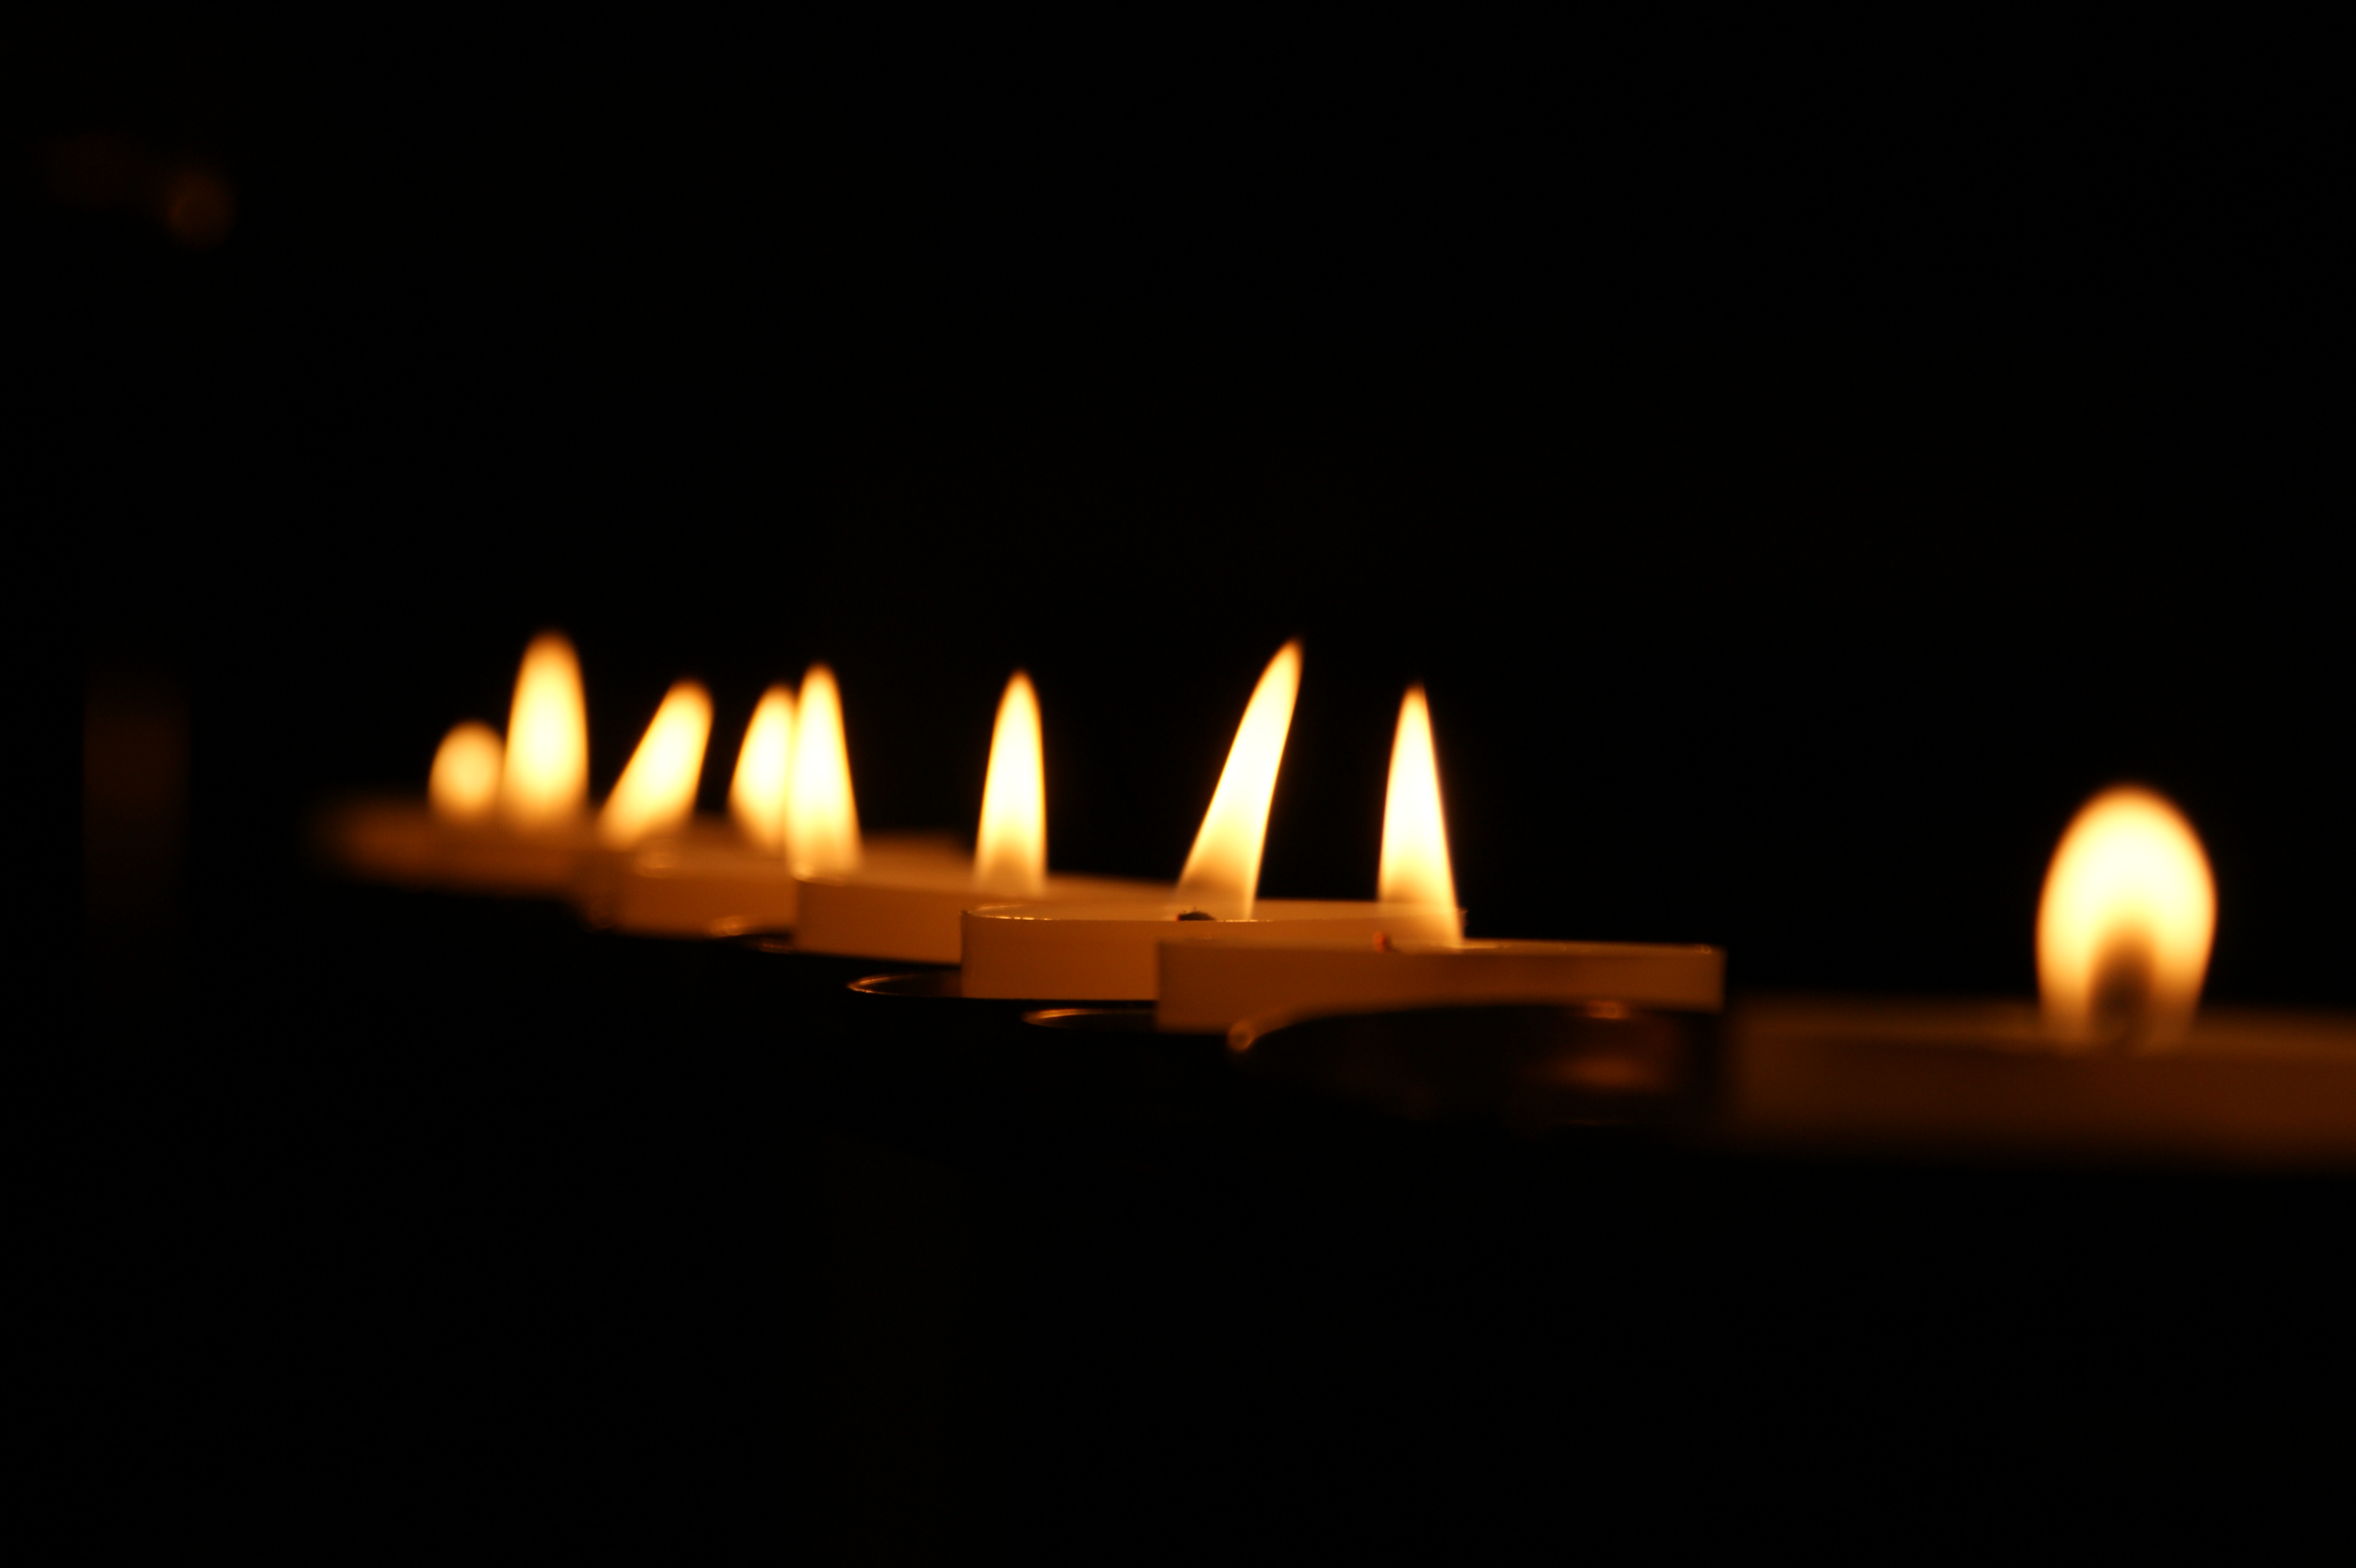 A line of small votive candles flicker against a black background.